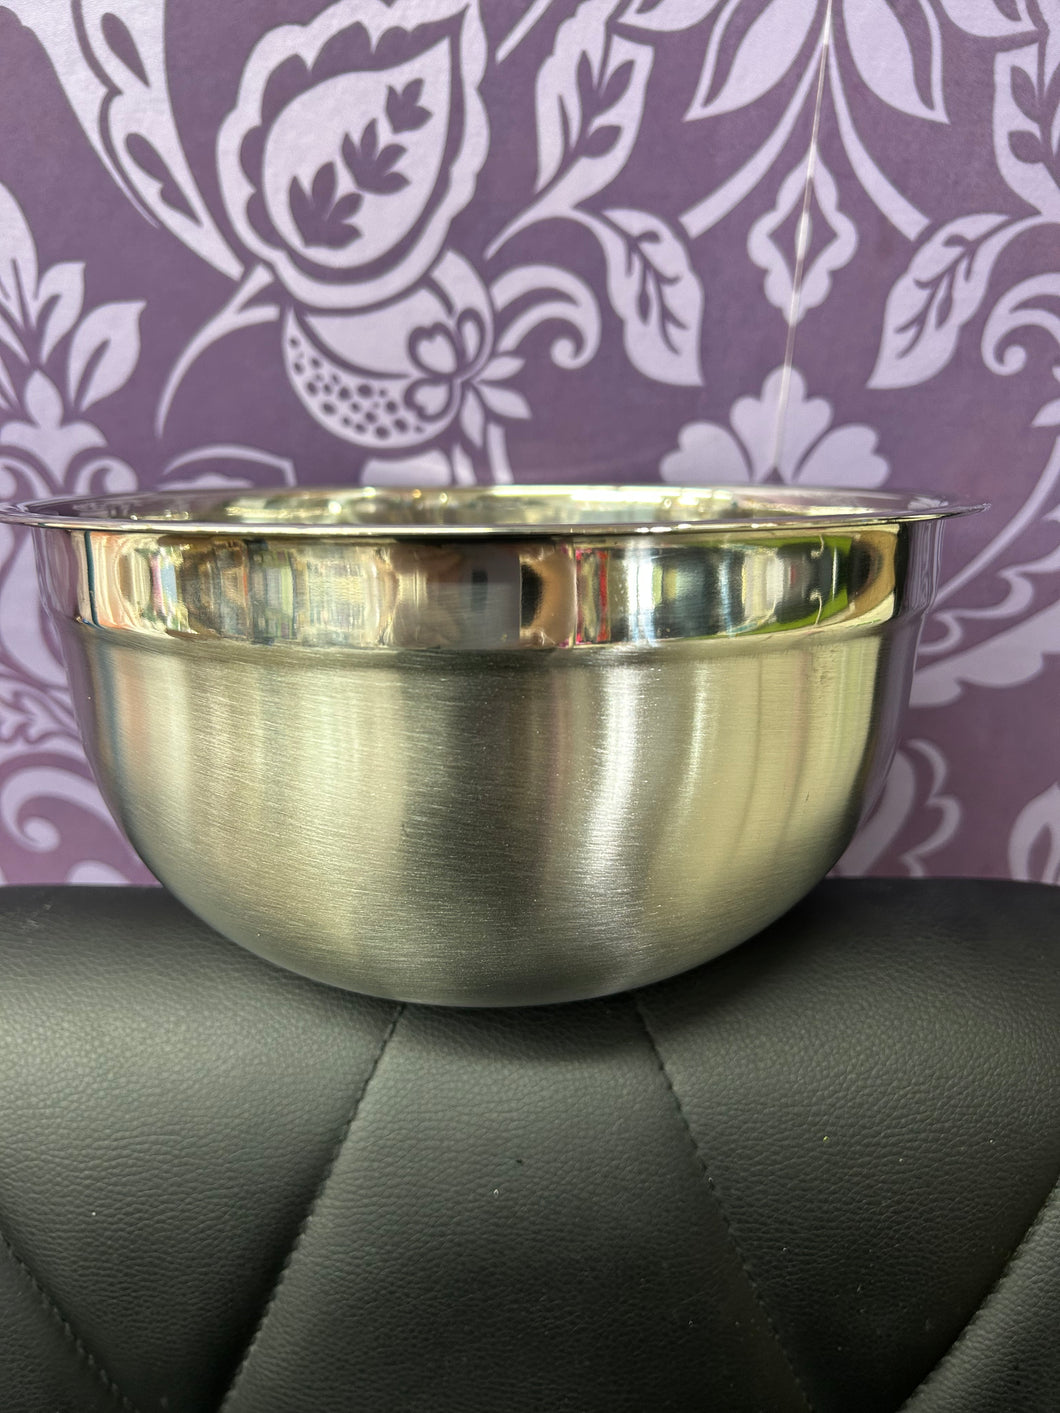 STAINLESS STEEL BOWL 24CM